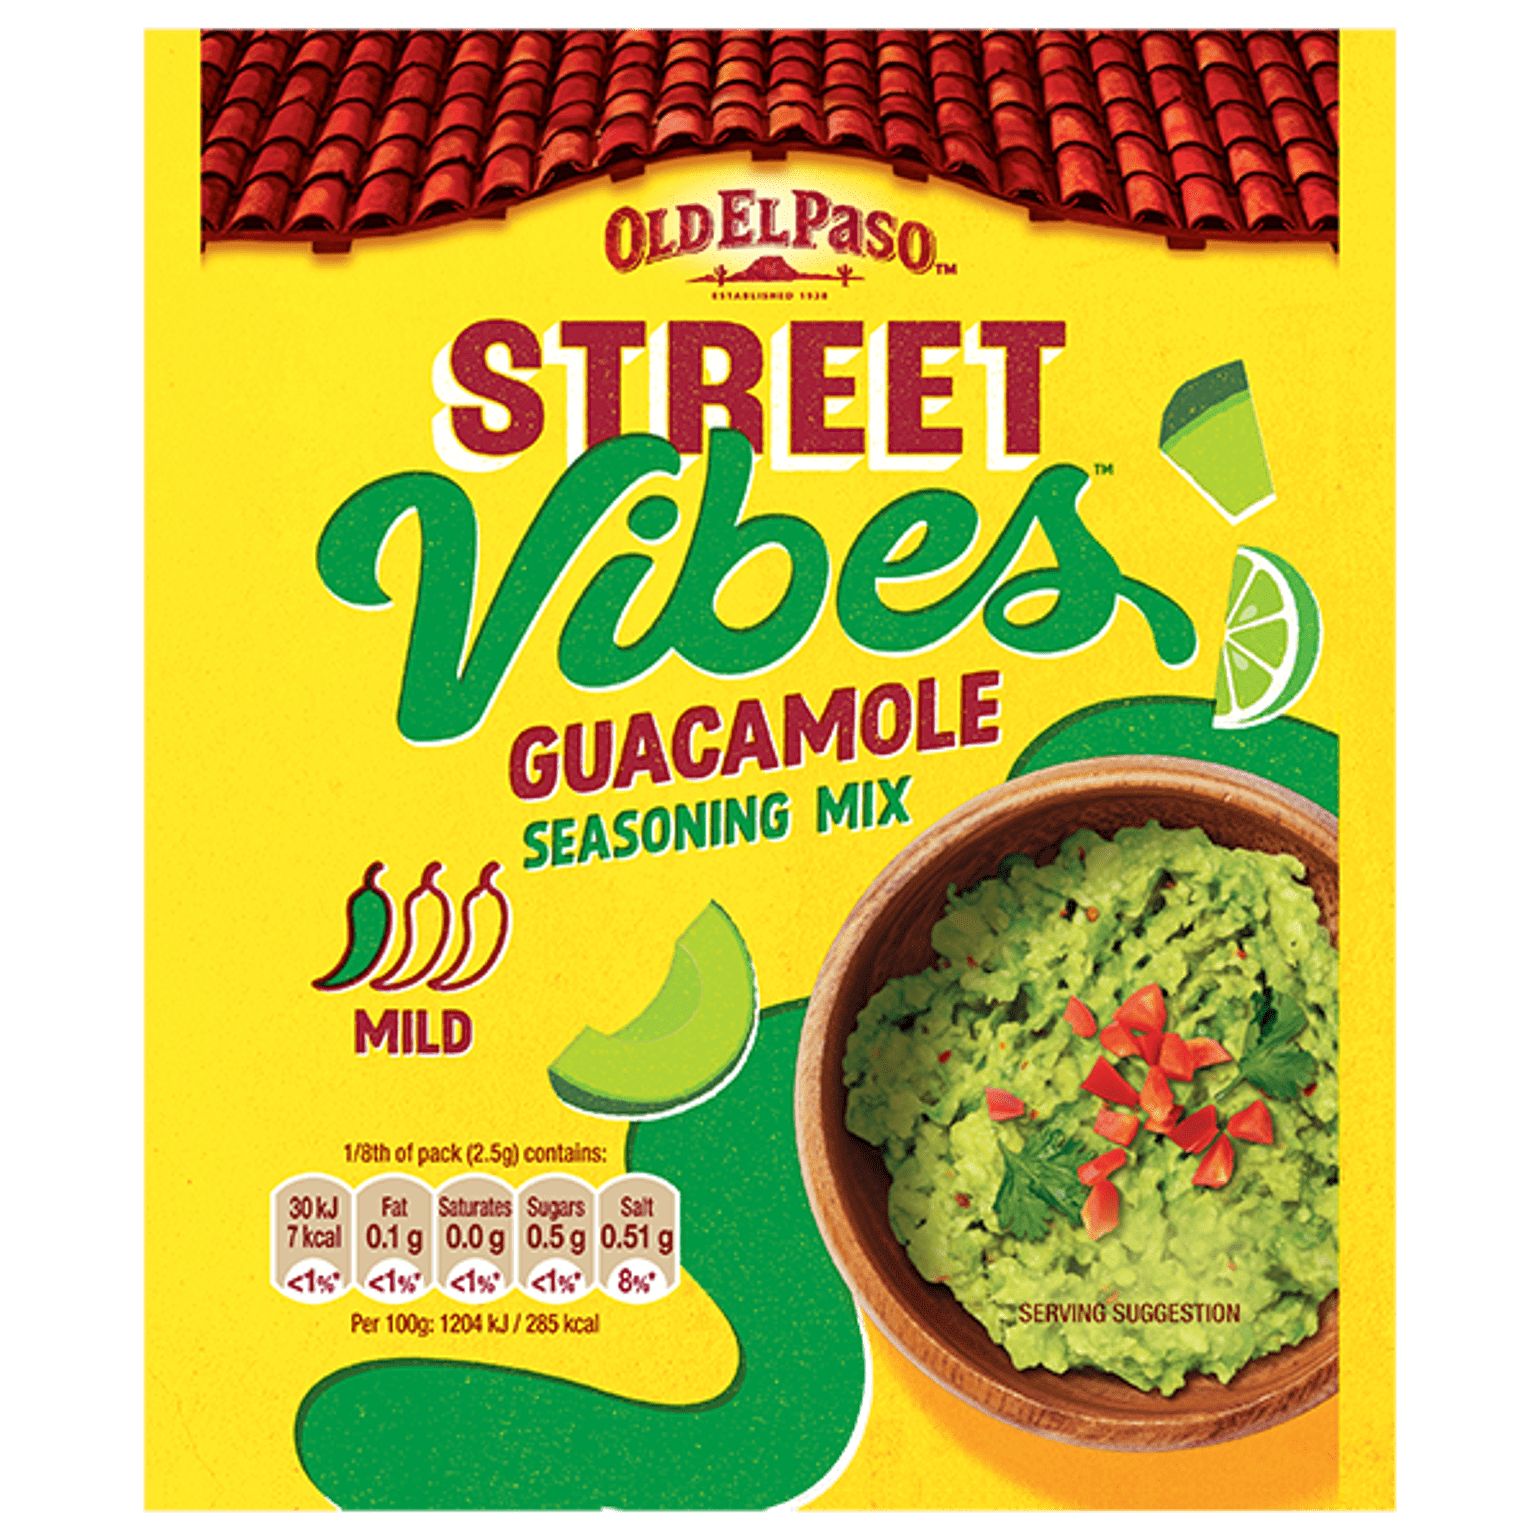 A pack of Old El Paso Street Vibes Guacamole Spice Mix, 20g